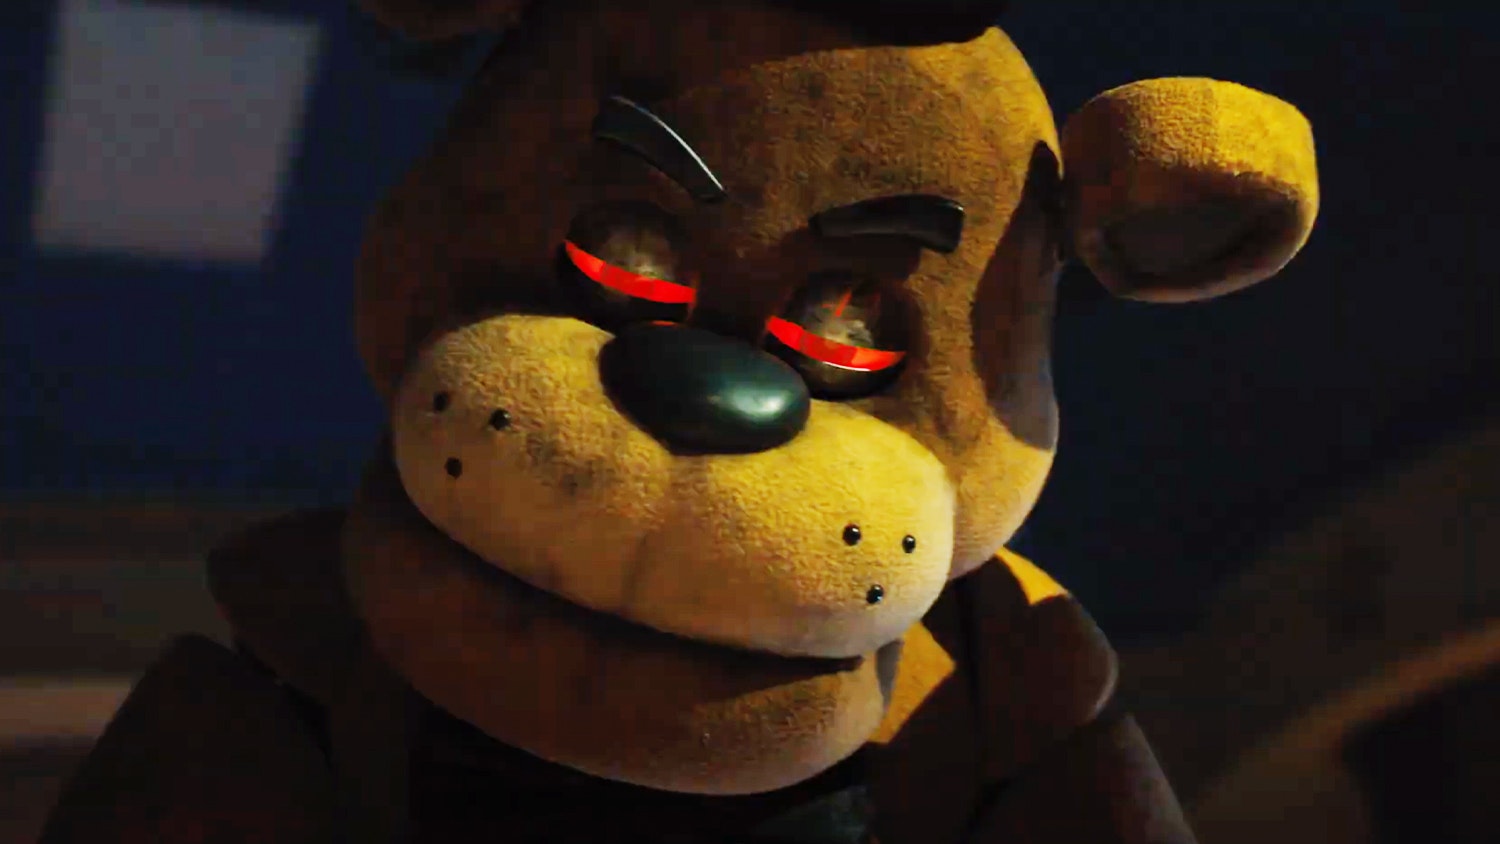 Five Nights At Freddy's Trailer Brings The Horror Games To Life, Movies